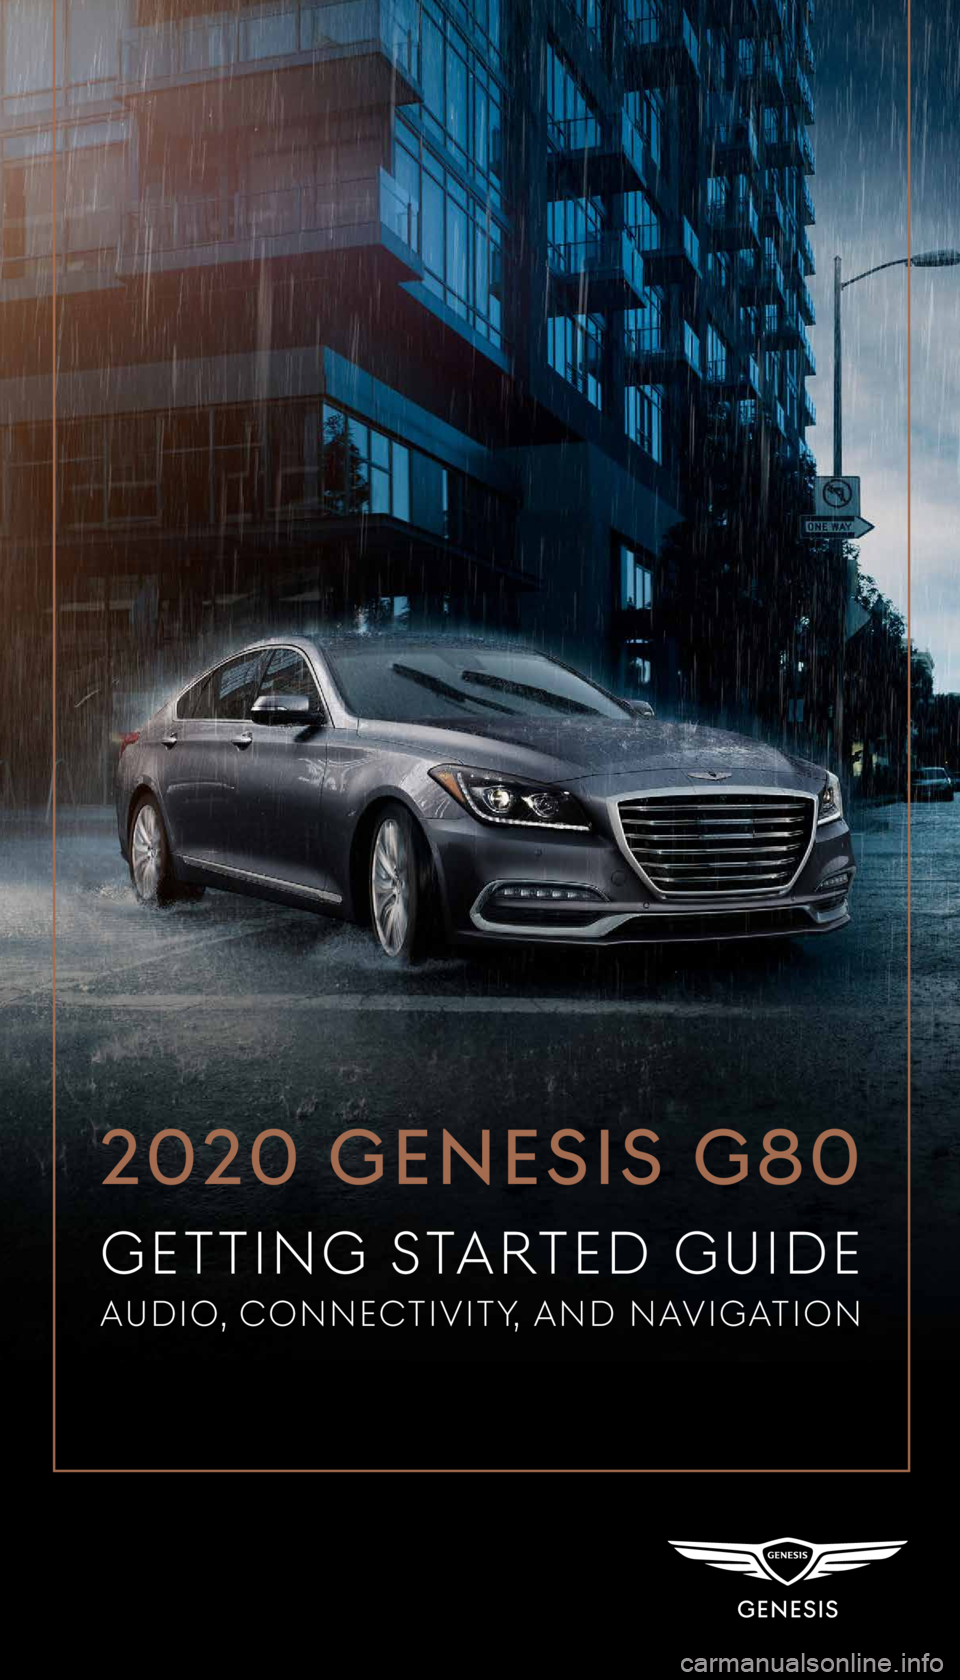 GENESIS G80 2020  Getting Started Guide  
2020 GENESIS G80
GETTING S
AUDIONNEVITY AND NAVIGON  